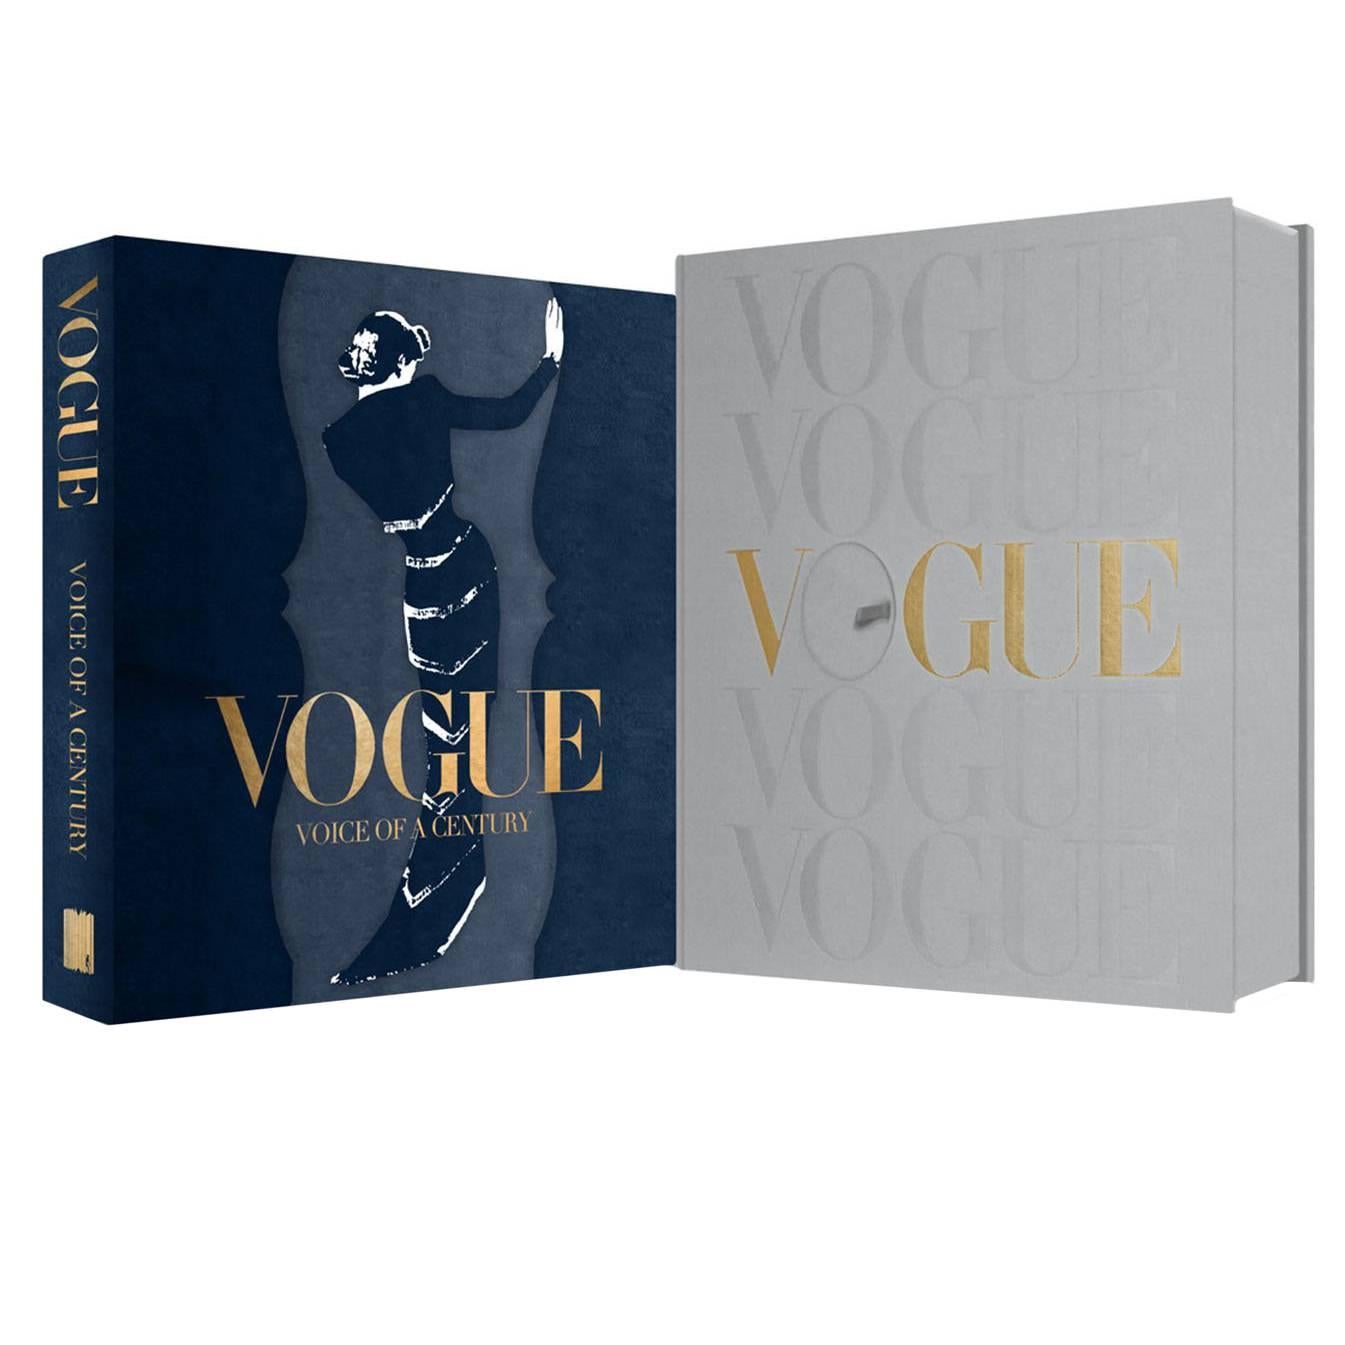 Vogue – Voice of a Century: The Official Signed Limited Edition Book